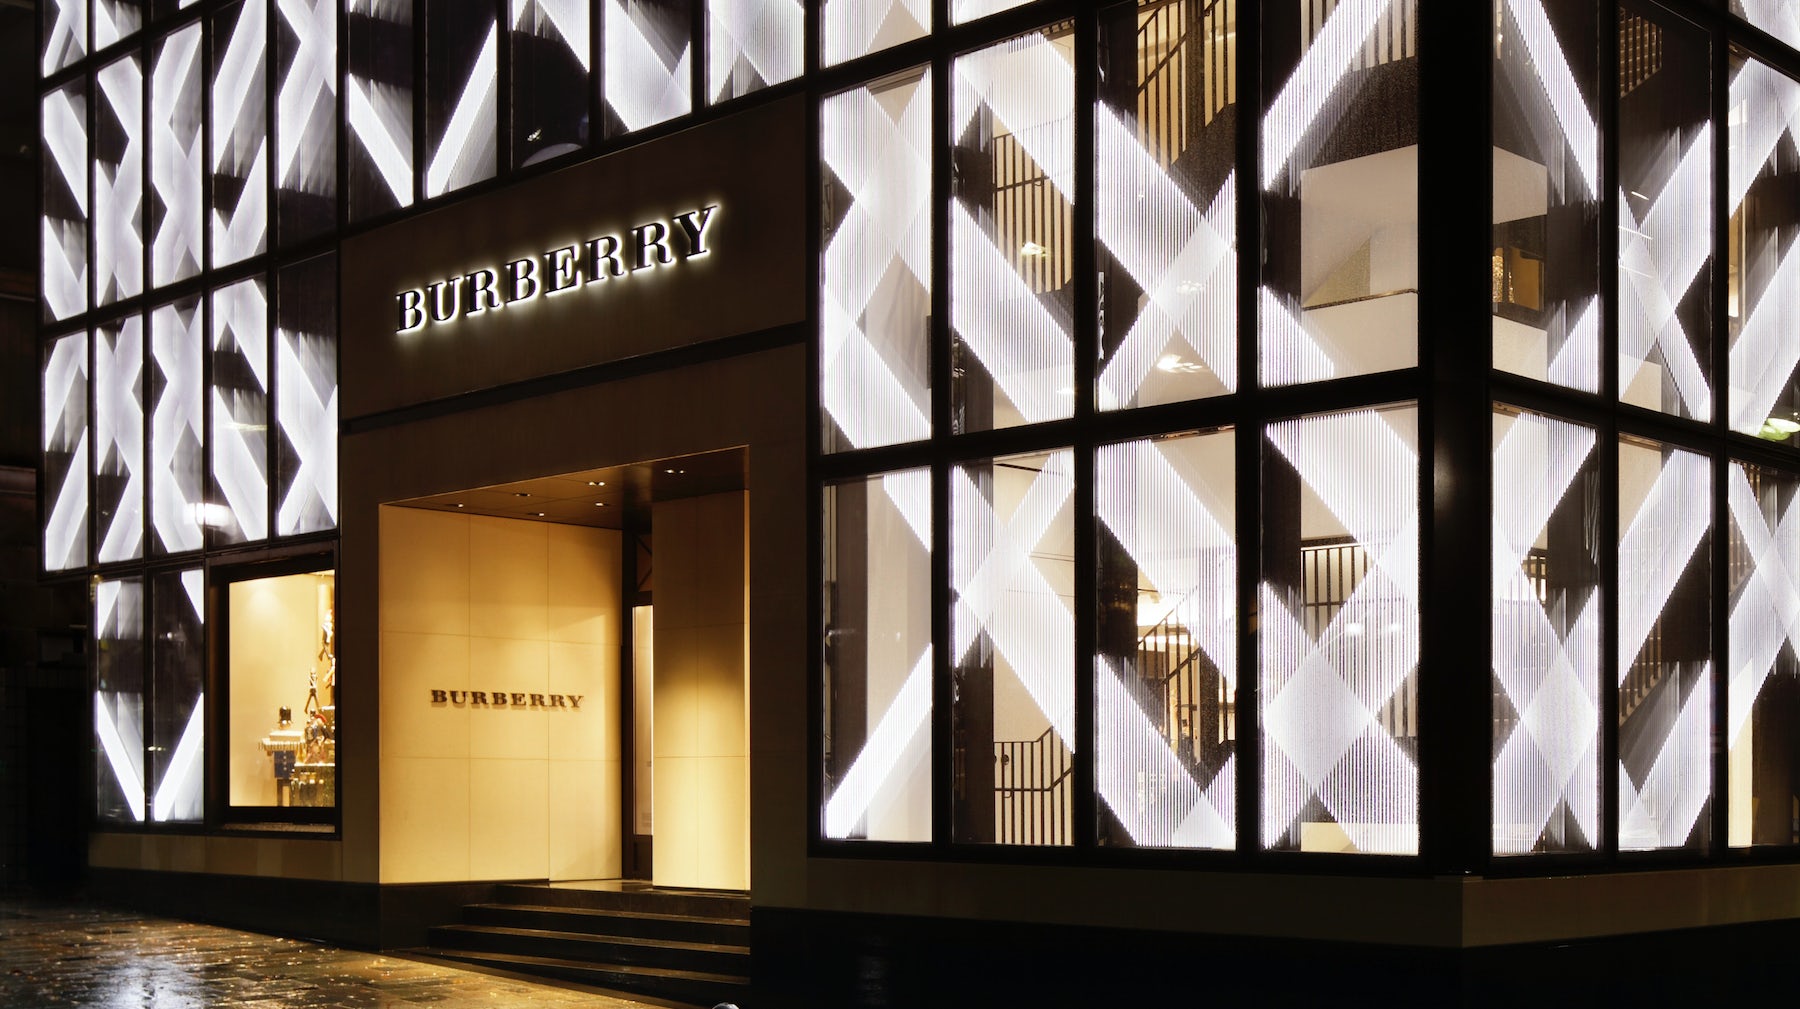 Burberry Group Jobs - Find Out How to Apply